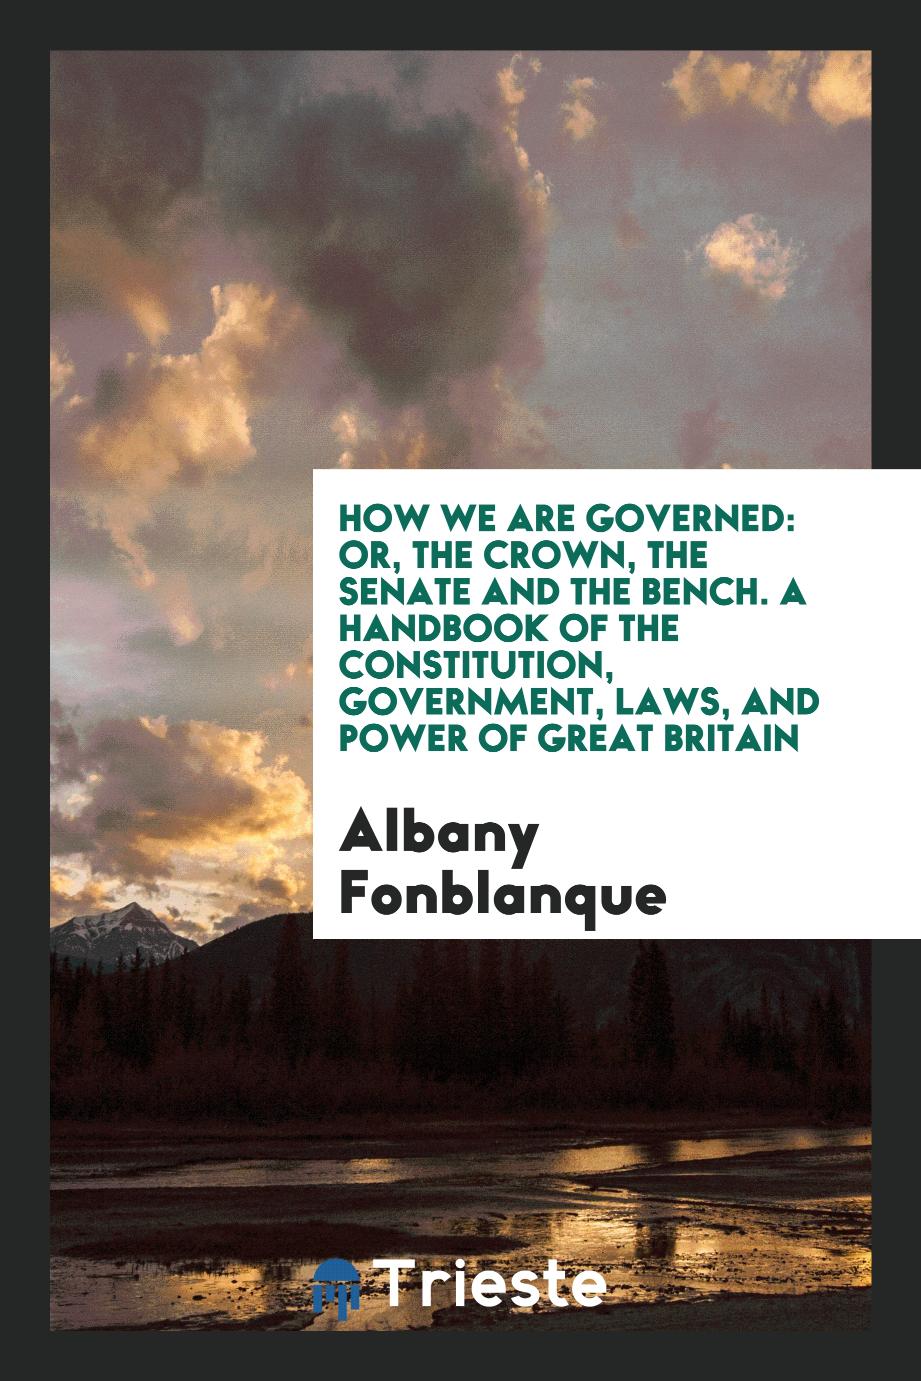 How We Are Governed: Or, The Crown, the Senate and the Bench. A Handbook of the Constitution, Government, Laws, and Power of Great Britain